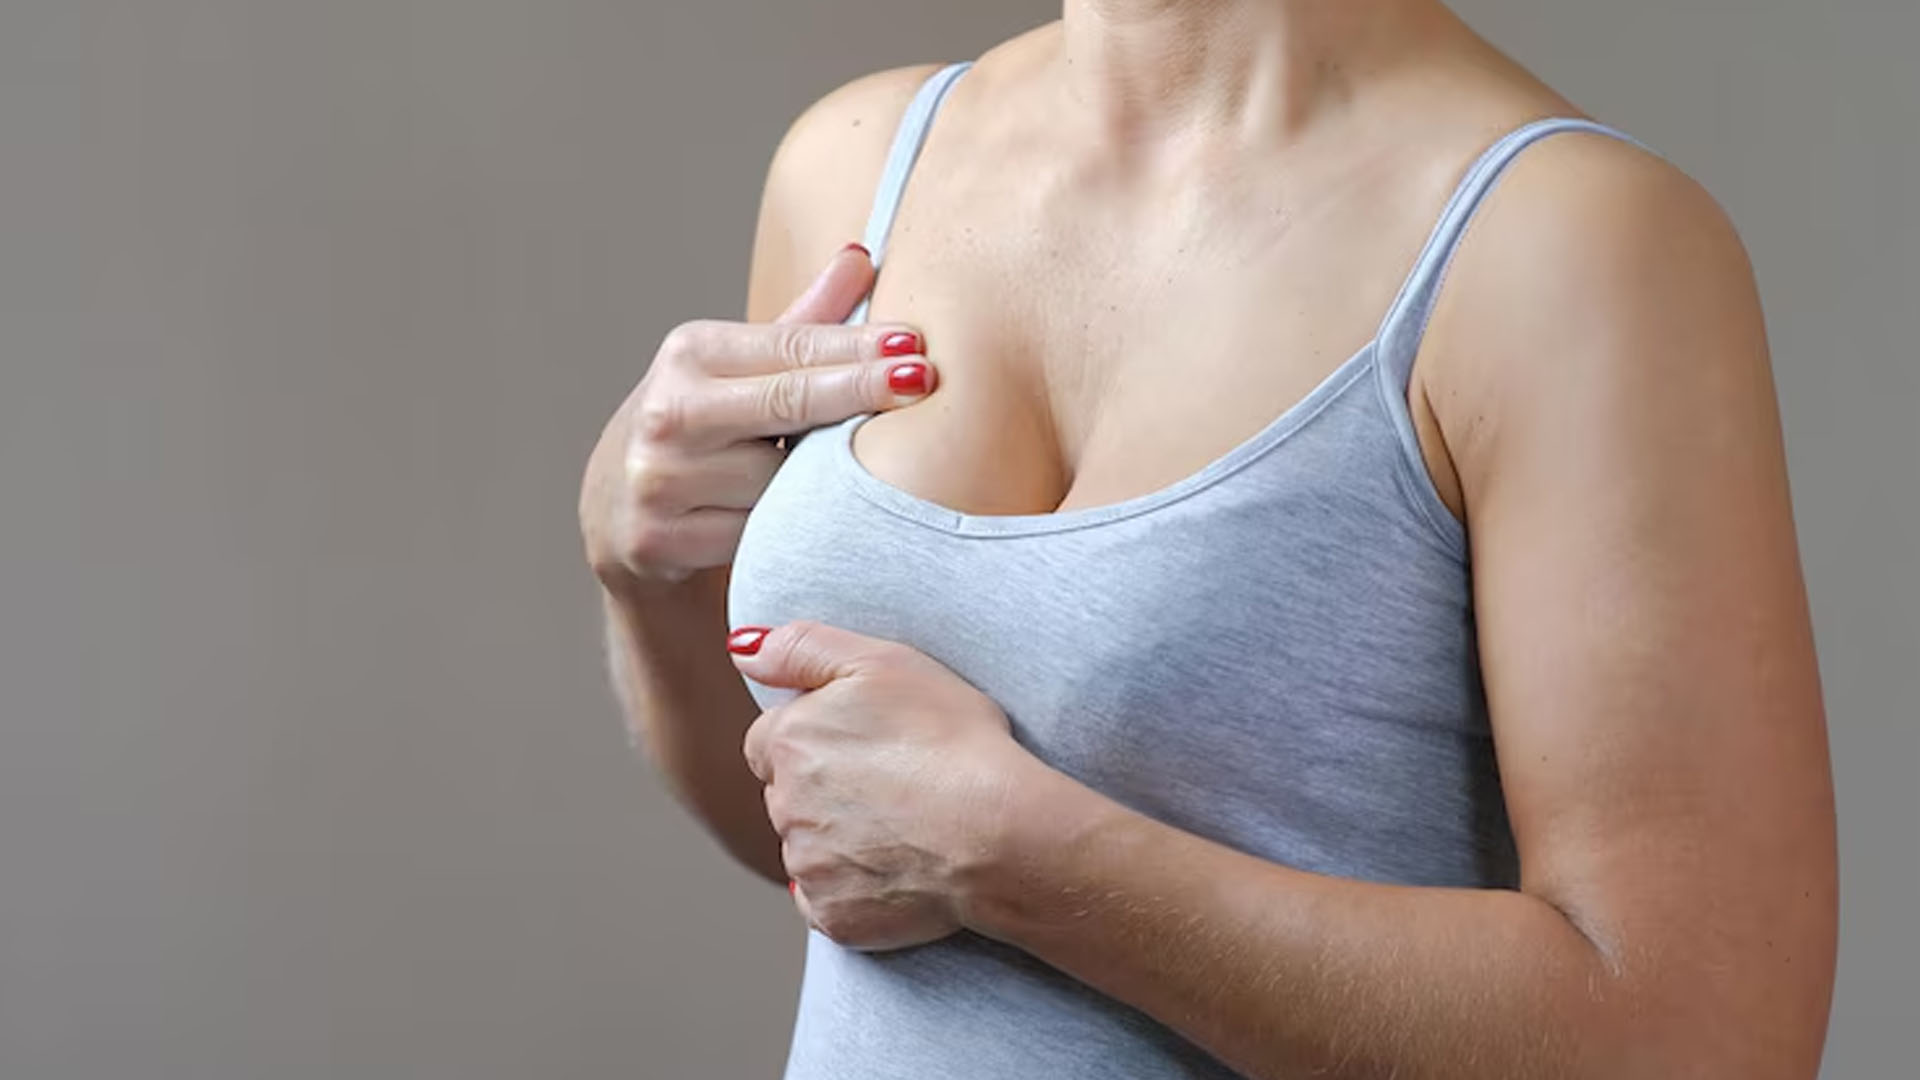 What are the Home Remedies for Breast Lumps?